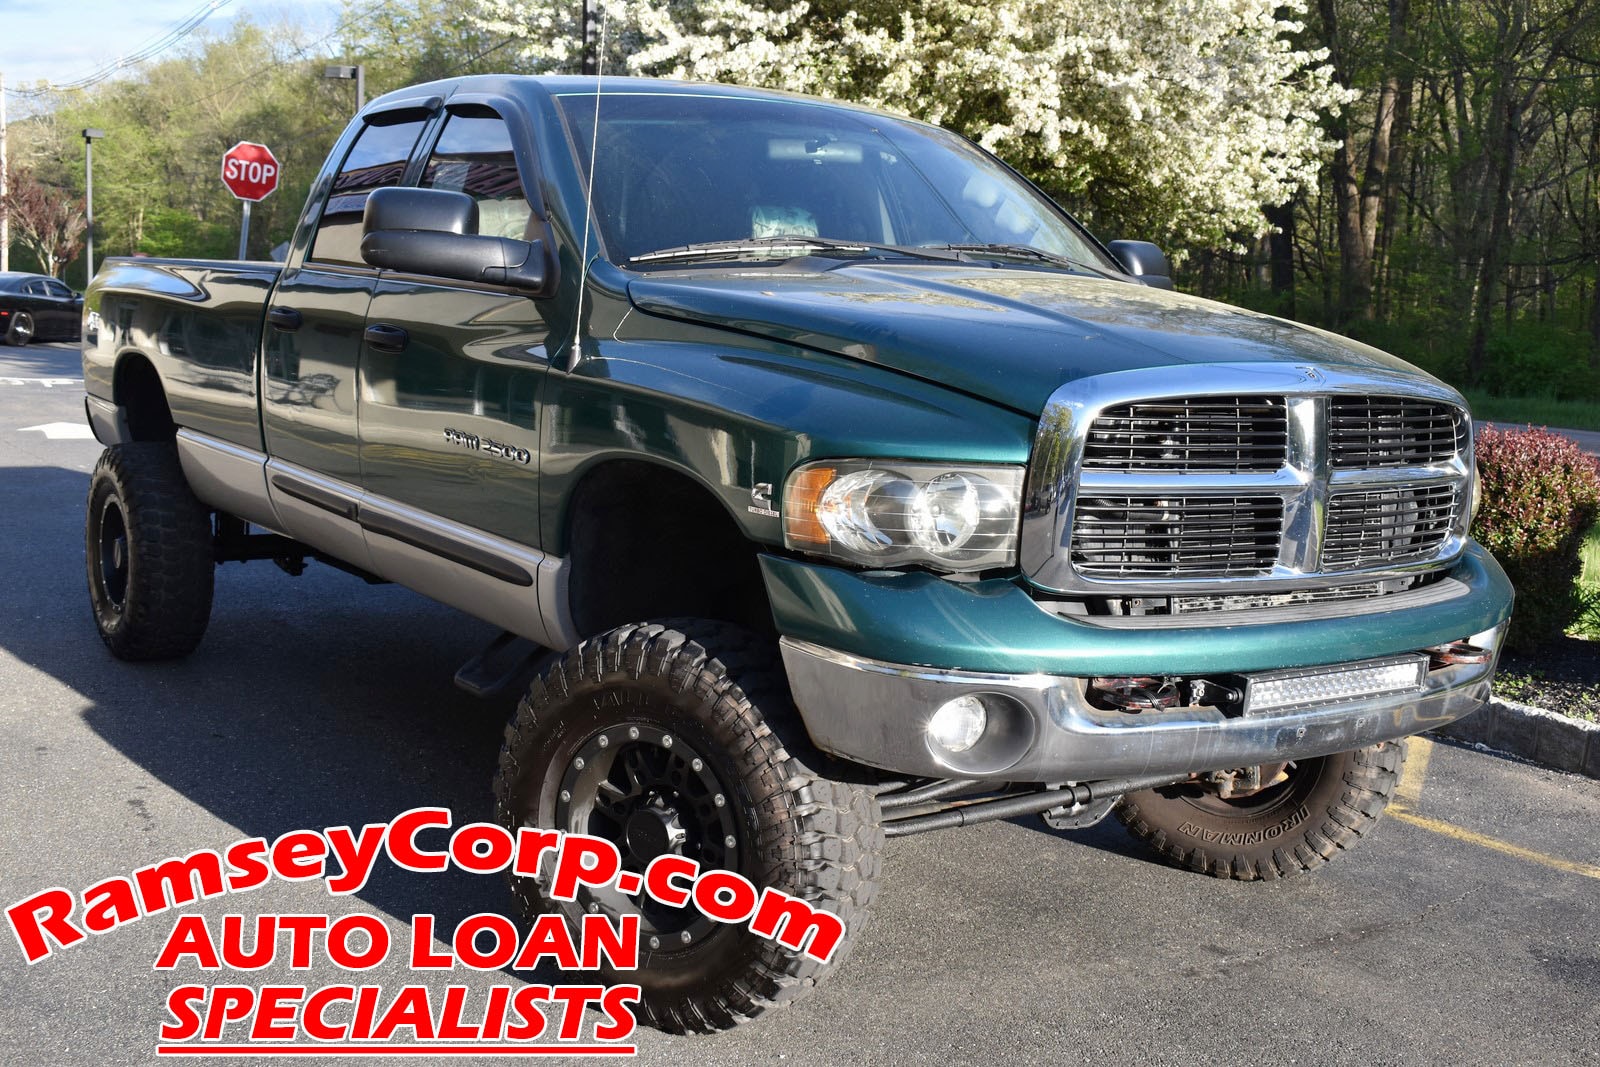 Used 2003 Dodge Ram 2500 For Sale at Ramsey Corp. | VIN: 3D7KU28C93G785969